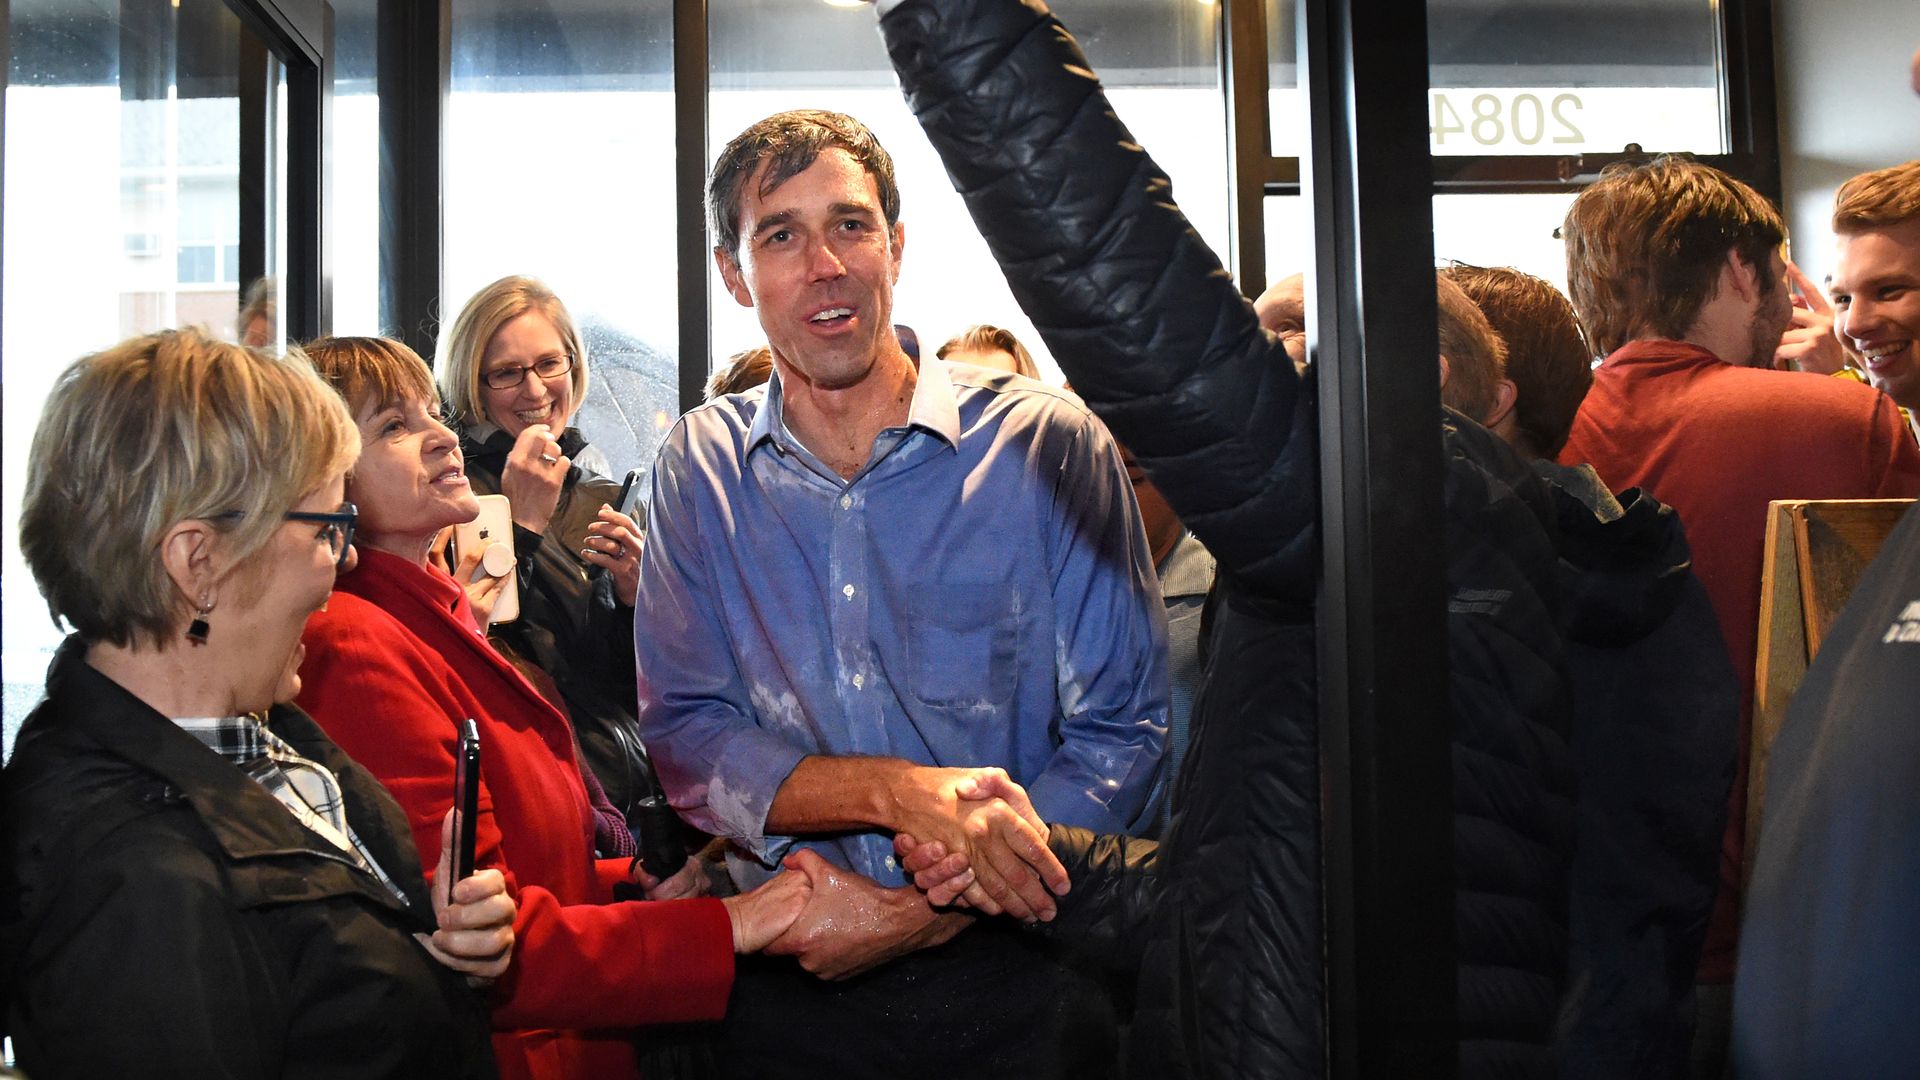 In this image, Beto stands soaked in rain and shaking multiple hands while walking through a door.